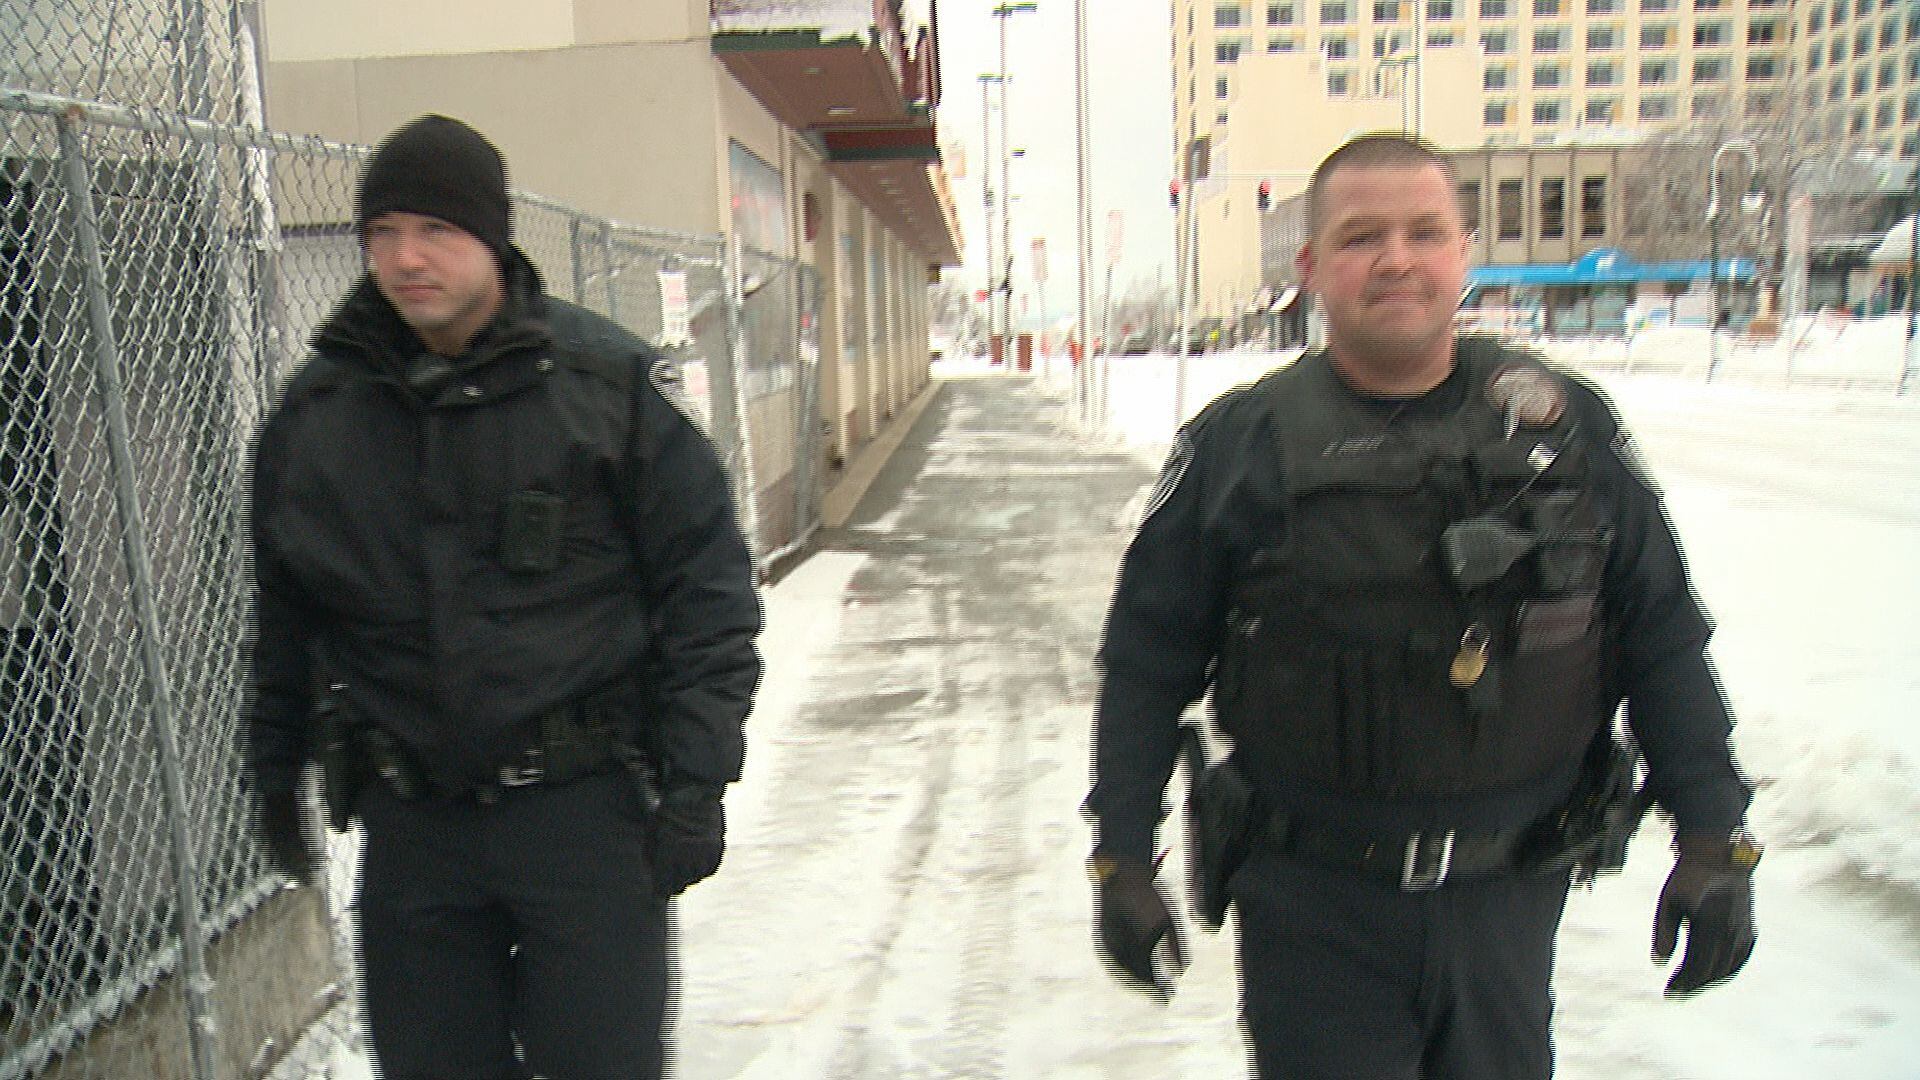 Officers Levi Stout and Matt Pendley patrol in downtown Anchorage